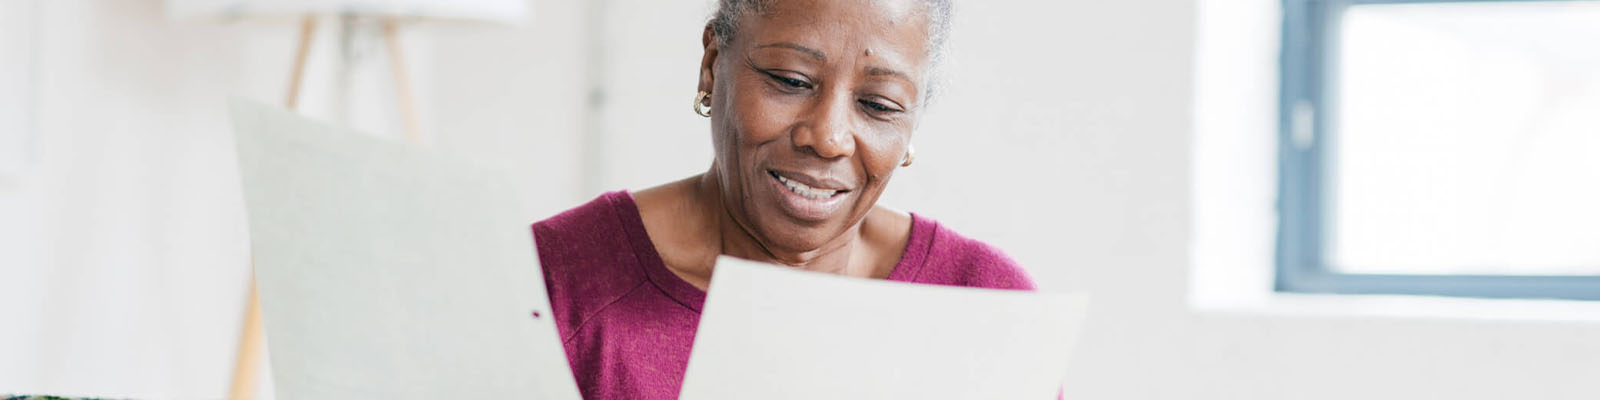 Senior woman holding documents in her hands